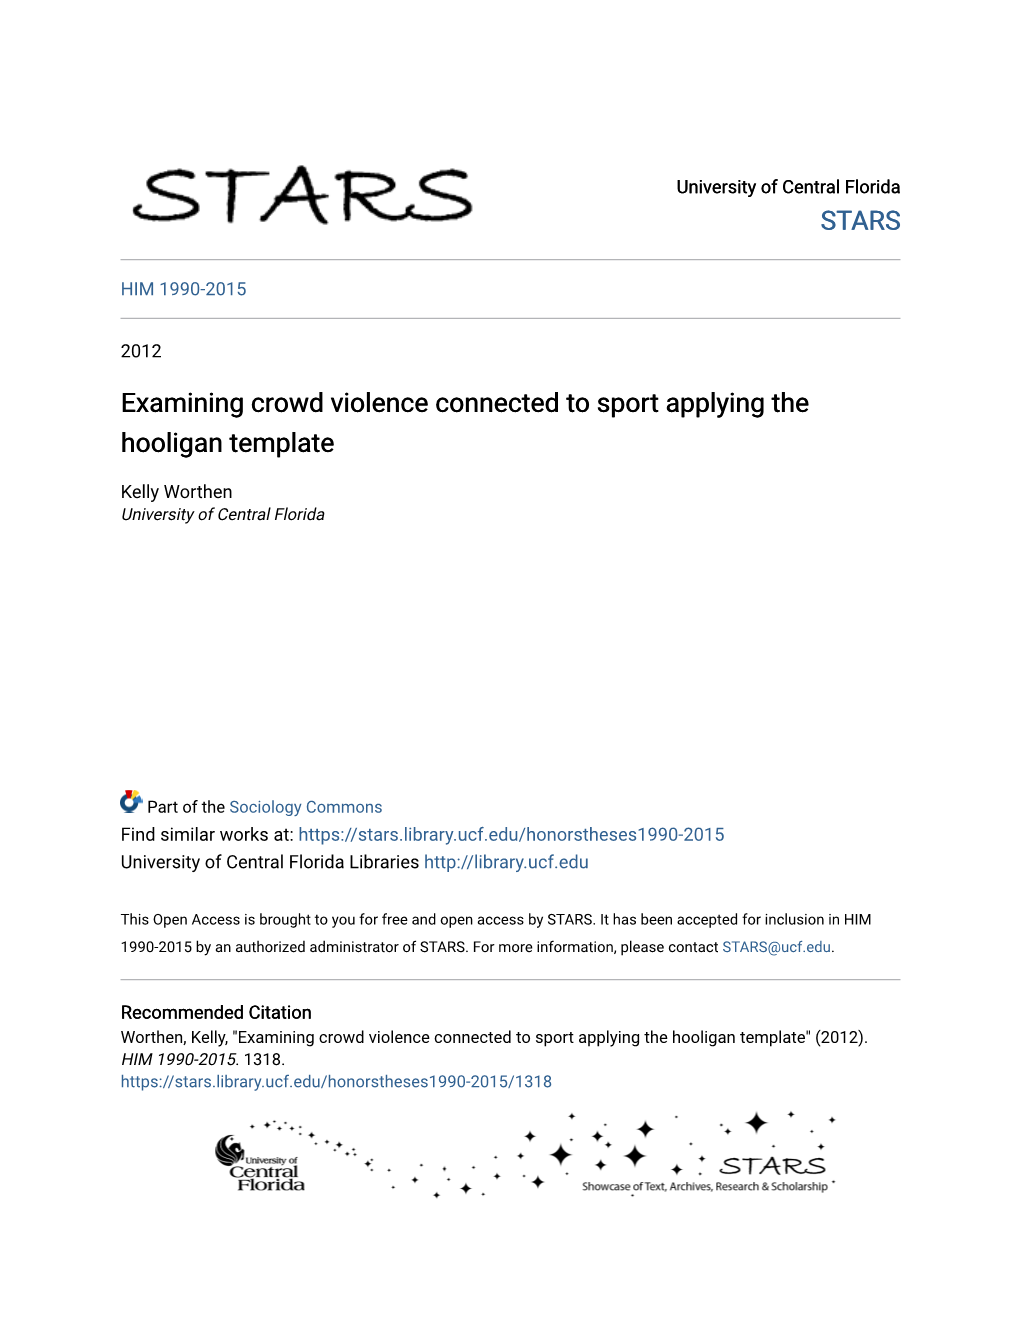 Examining Crowd Violence Connected to Sport Applying the Hooligan Template